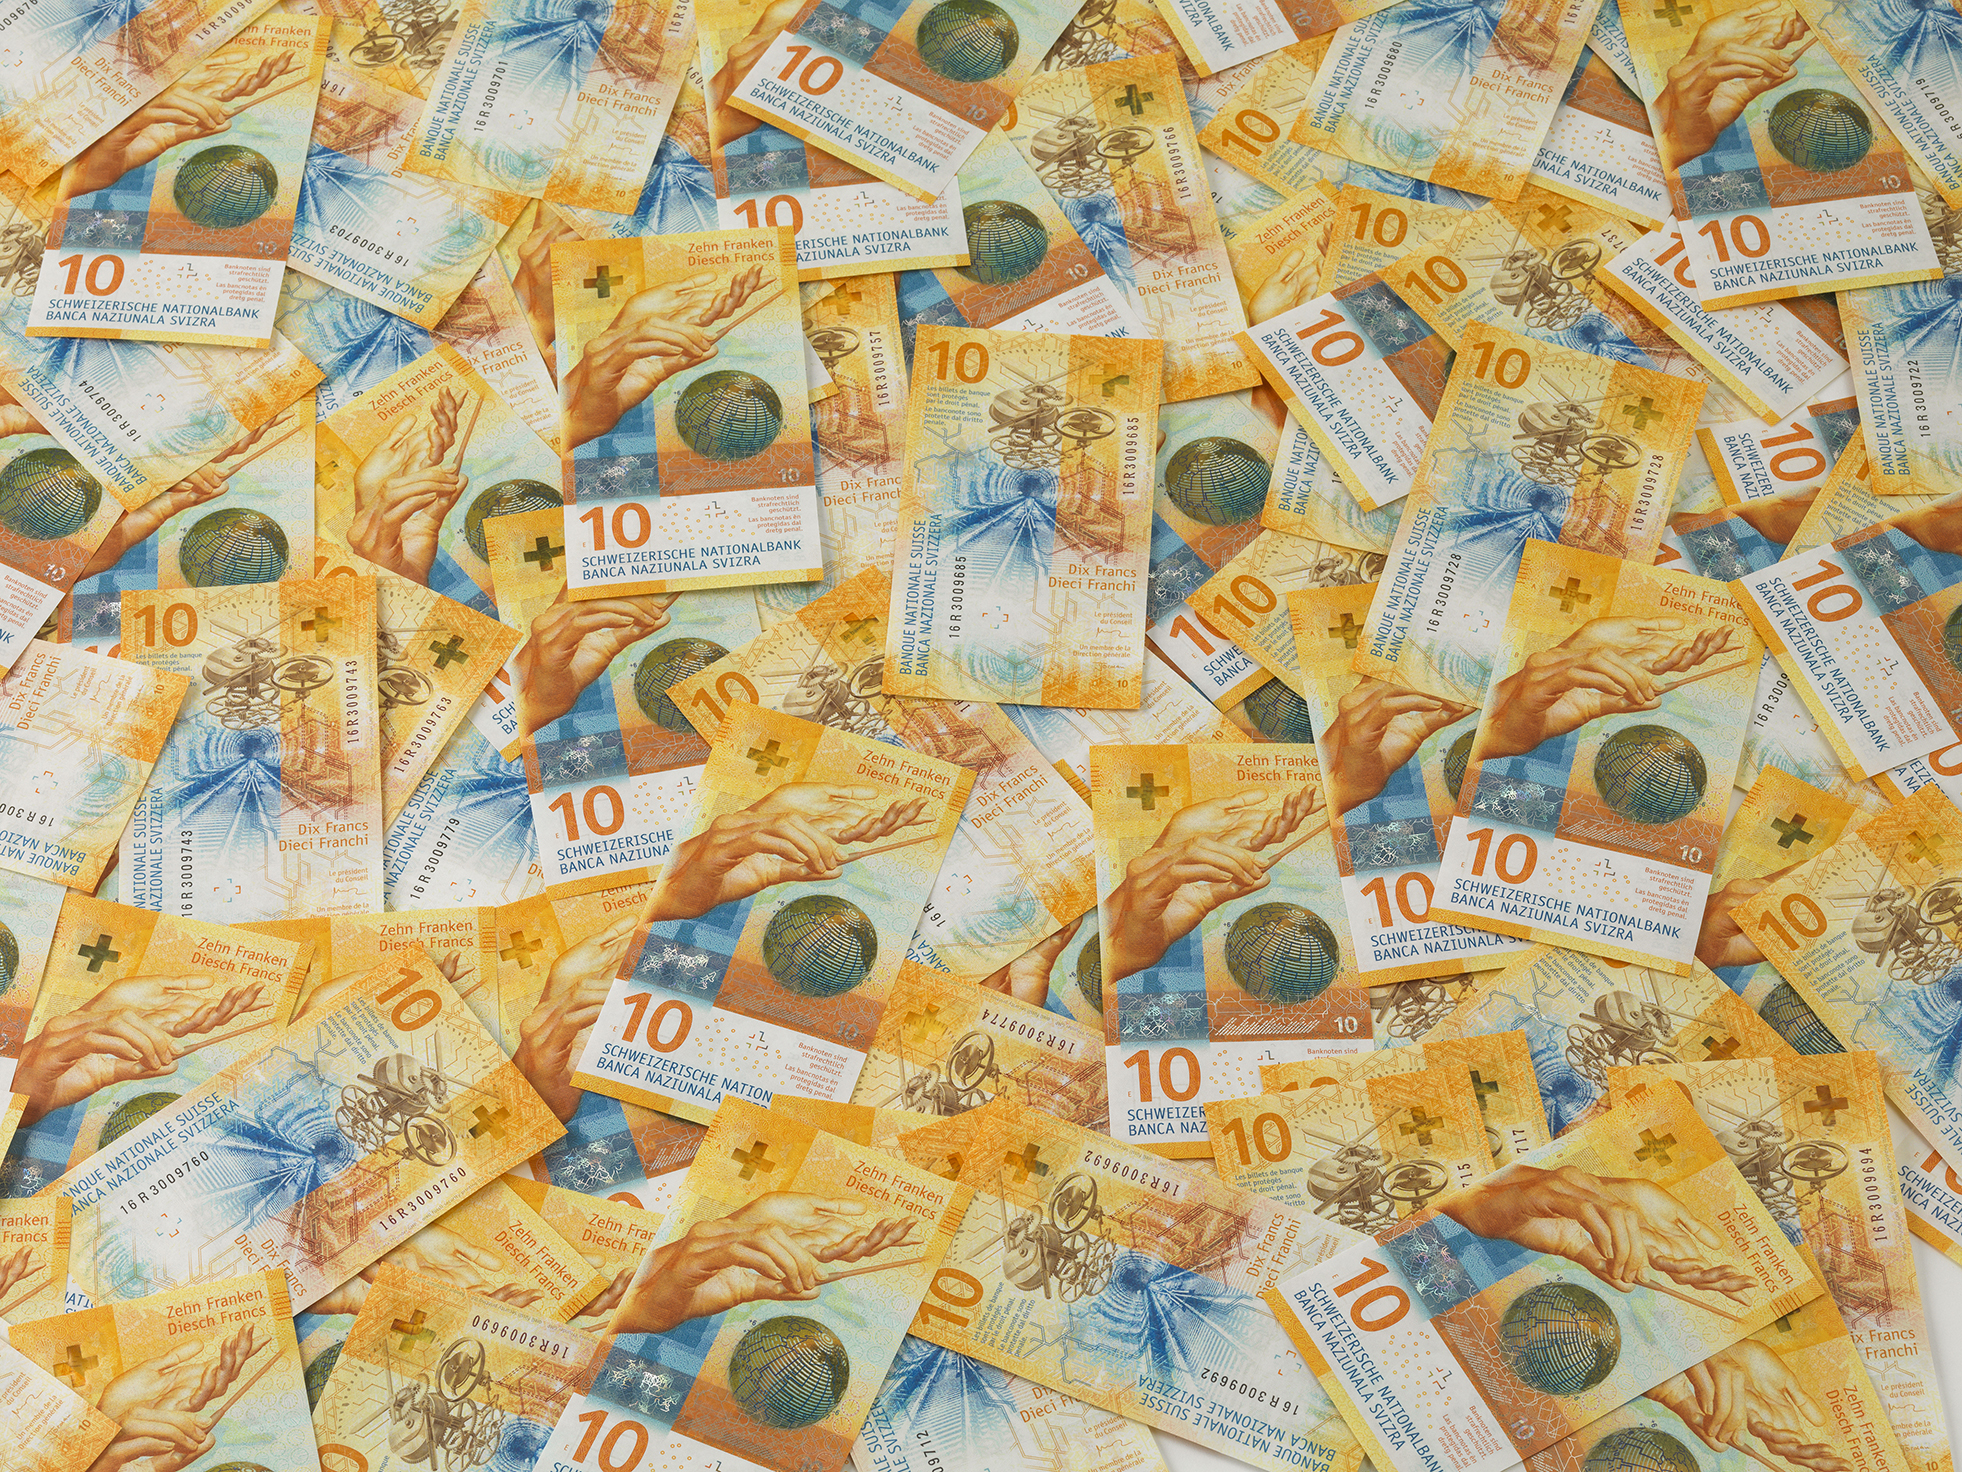 10-franc notes from ninth series